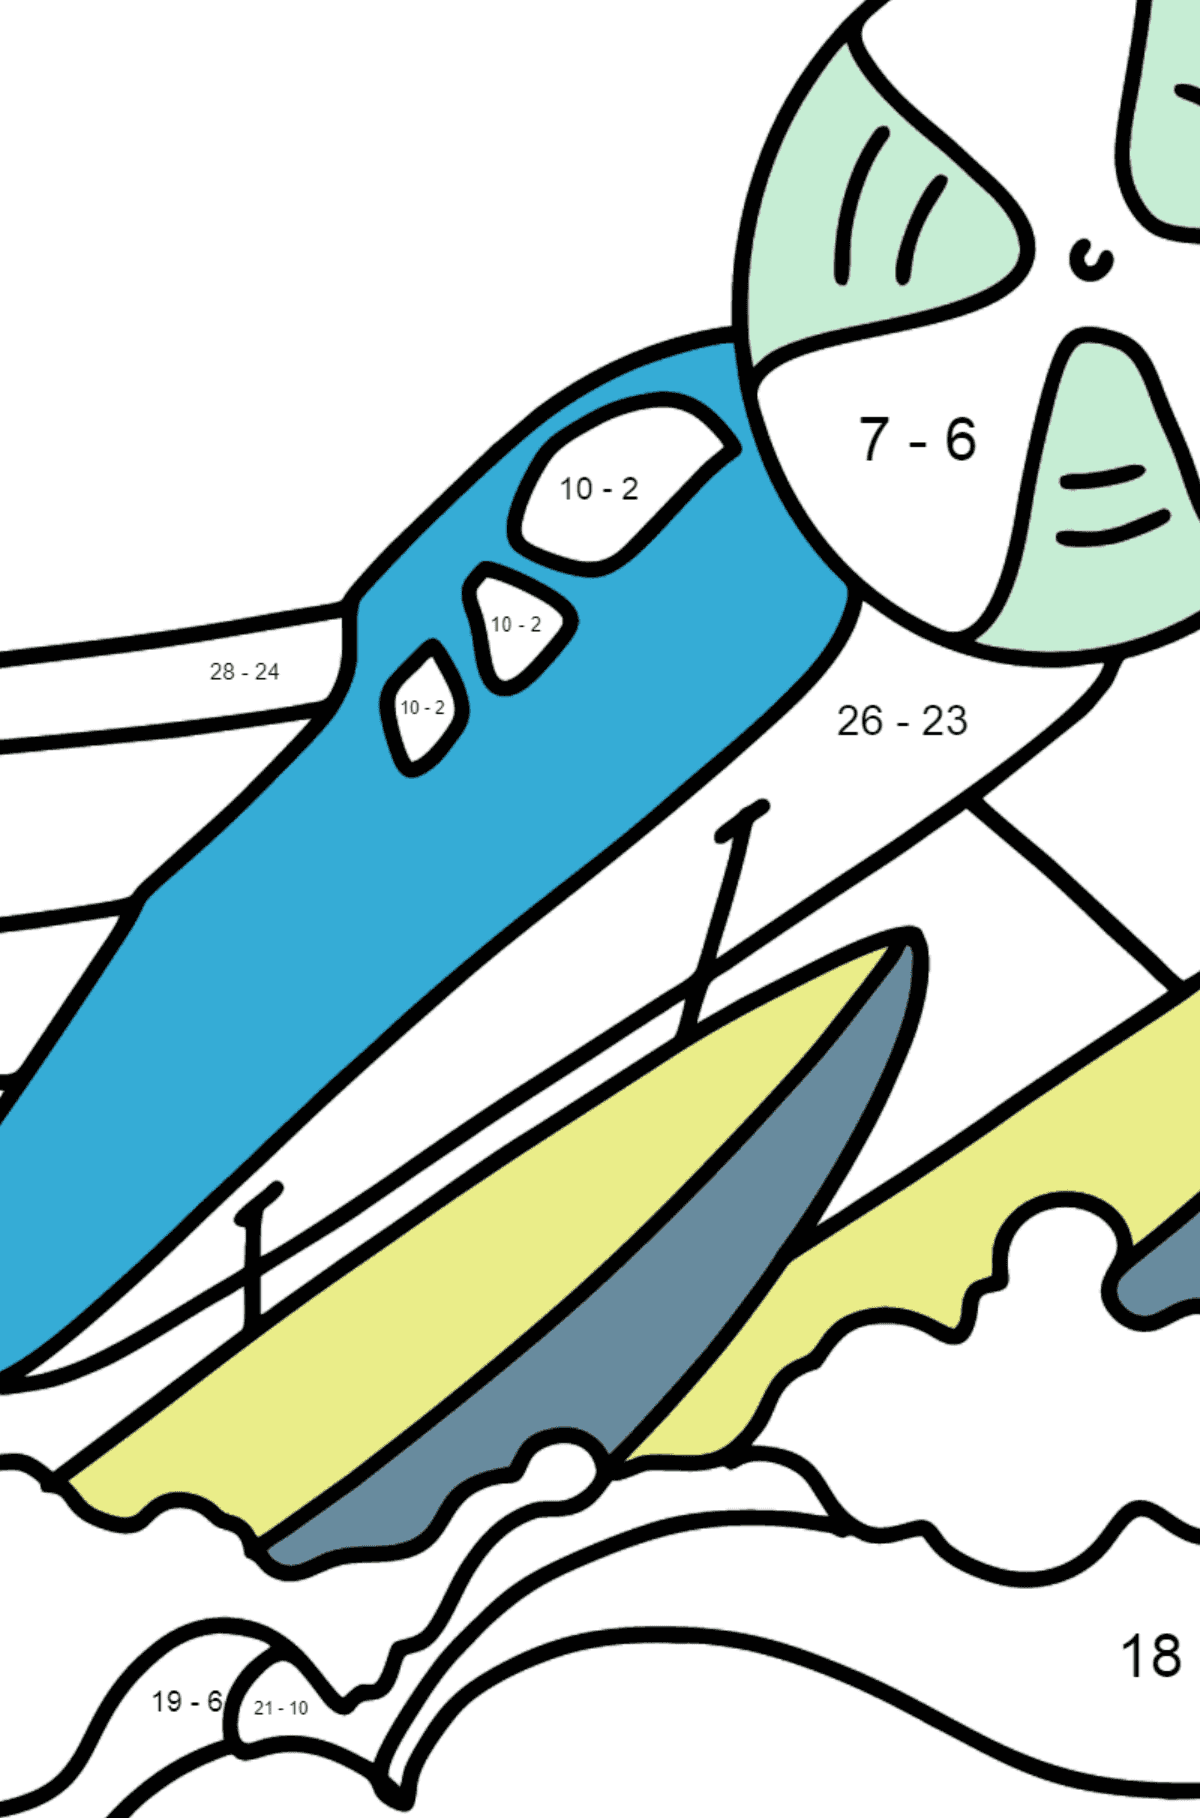 Amphibious Airplane coloring page - Math Coloring - Subtraction for Kids